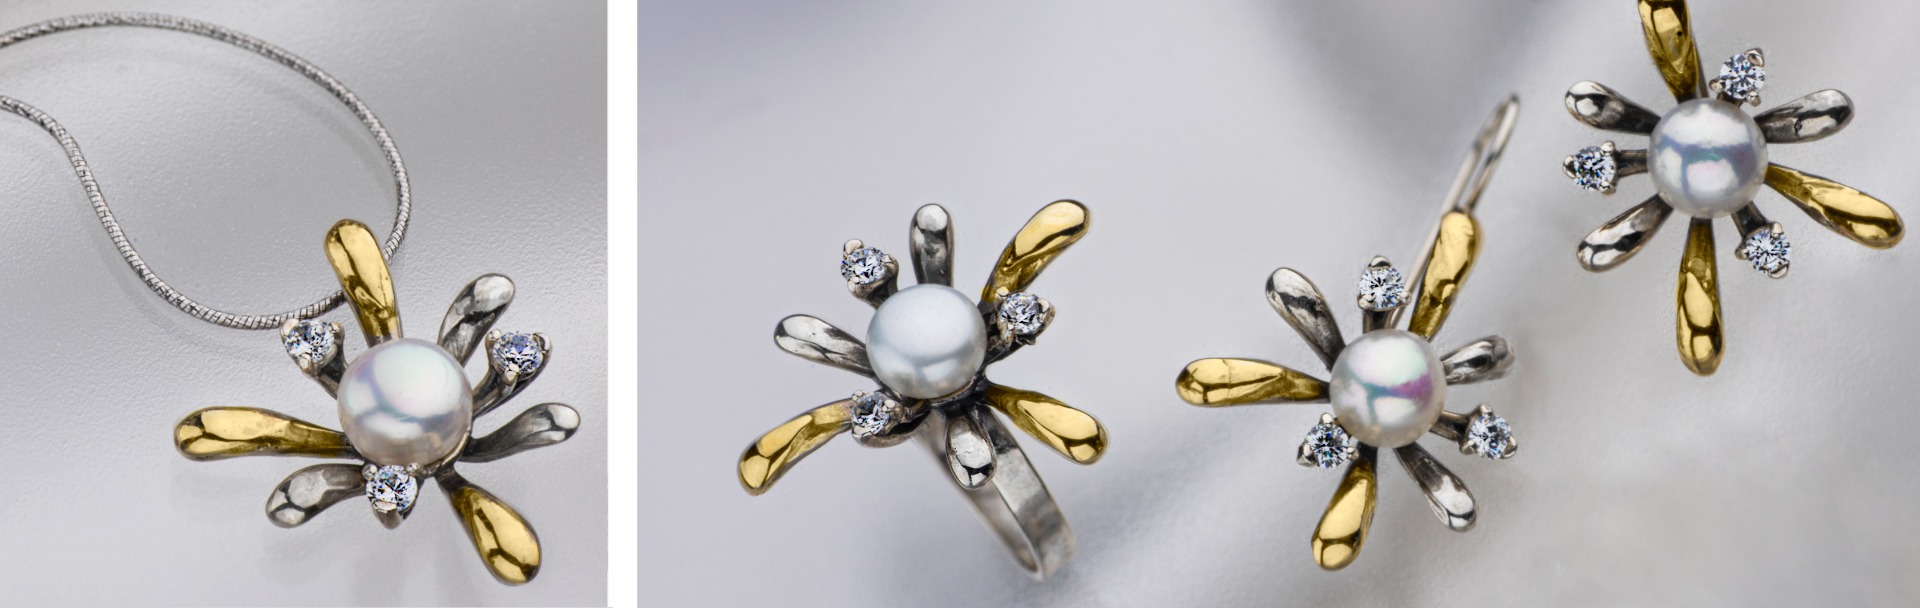 Pearly lilies Collection | 925 Sterling Silver & 9K Gold Jewelry with Pearl and Zircons